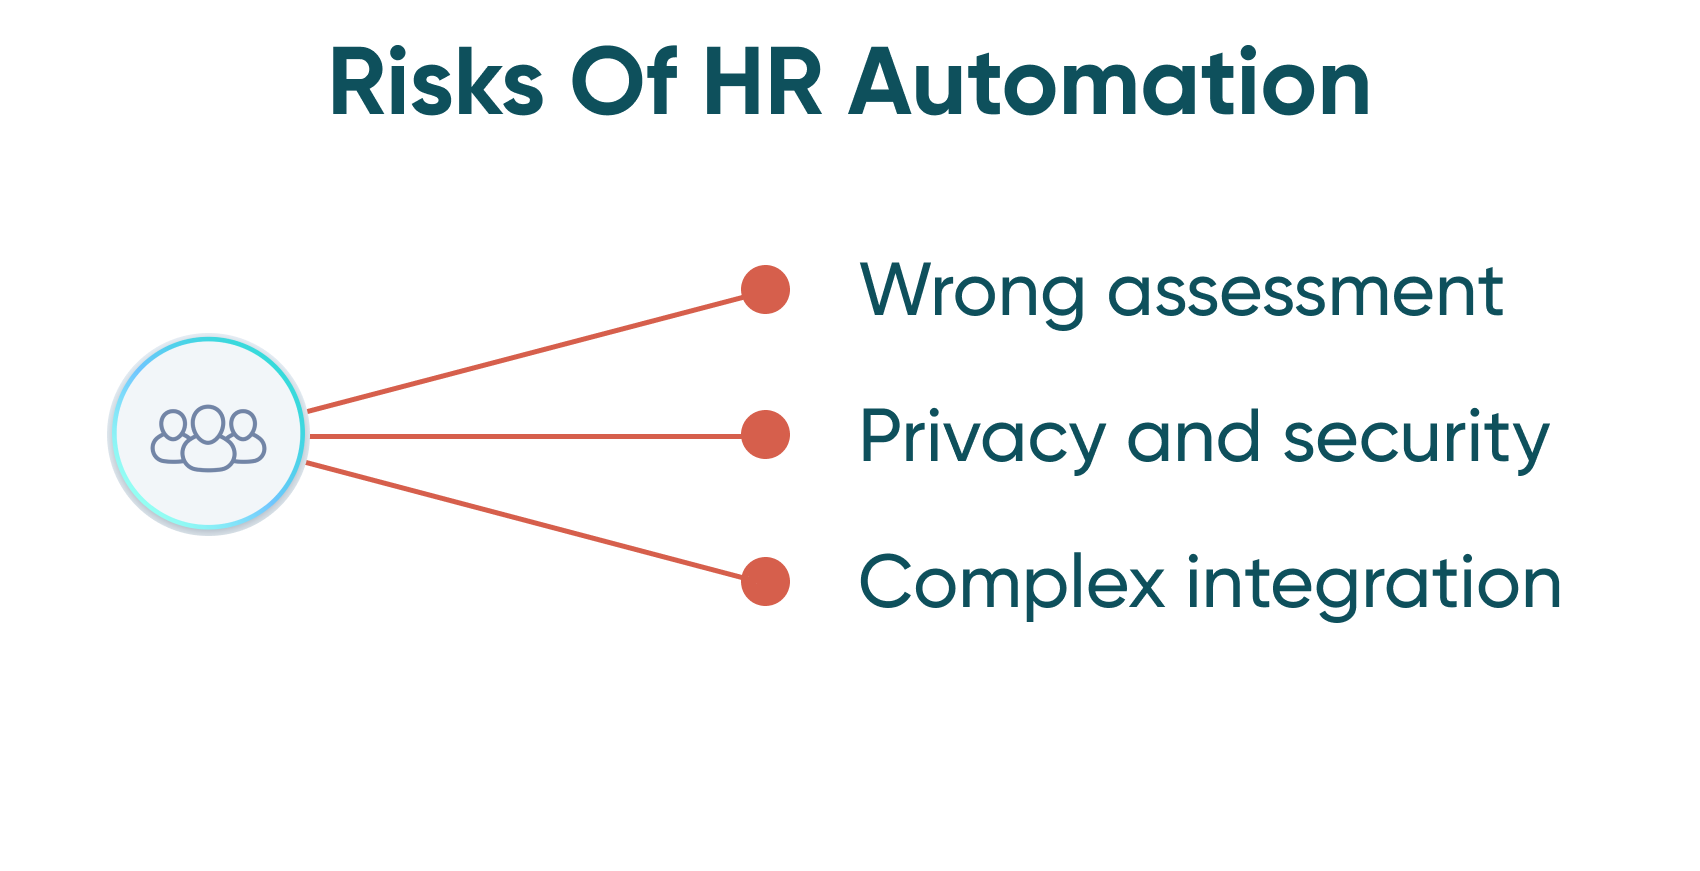 A bullet point image showing the main risks of hr automation. 